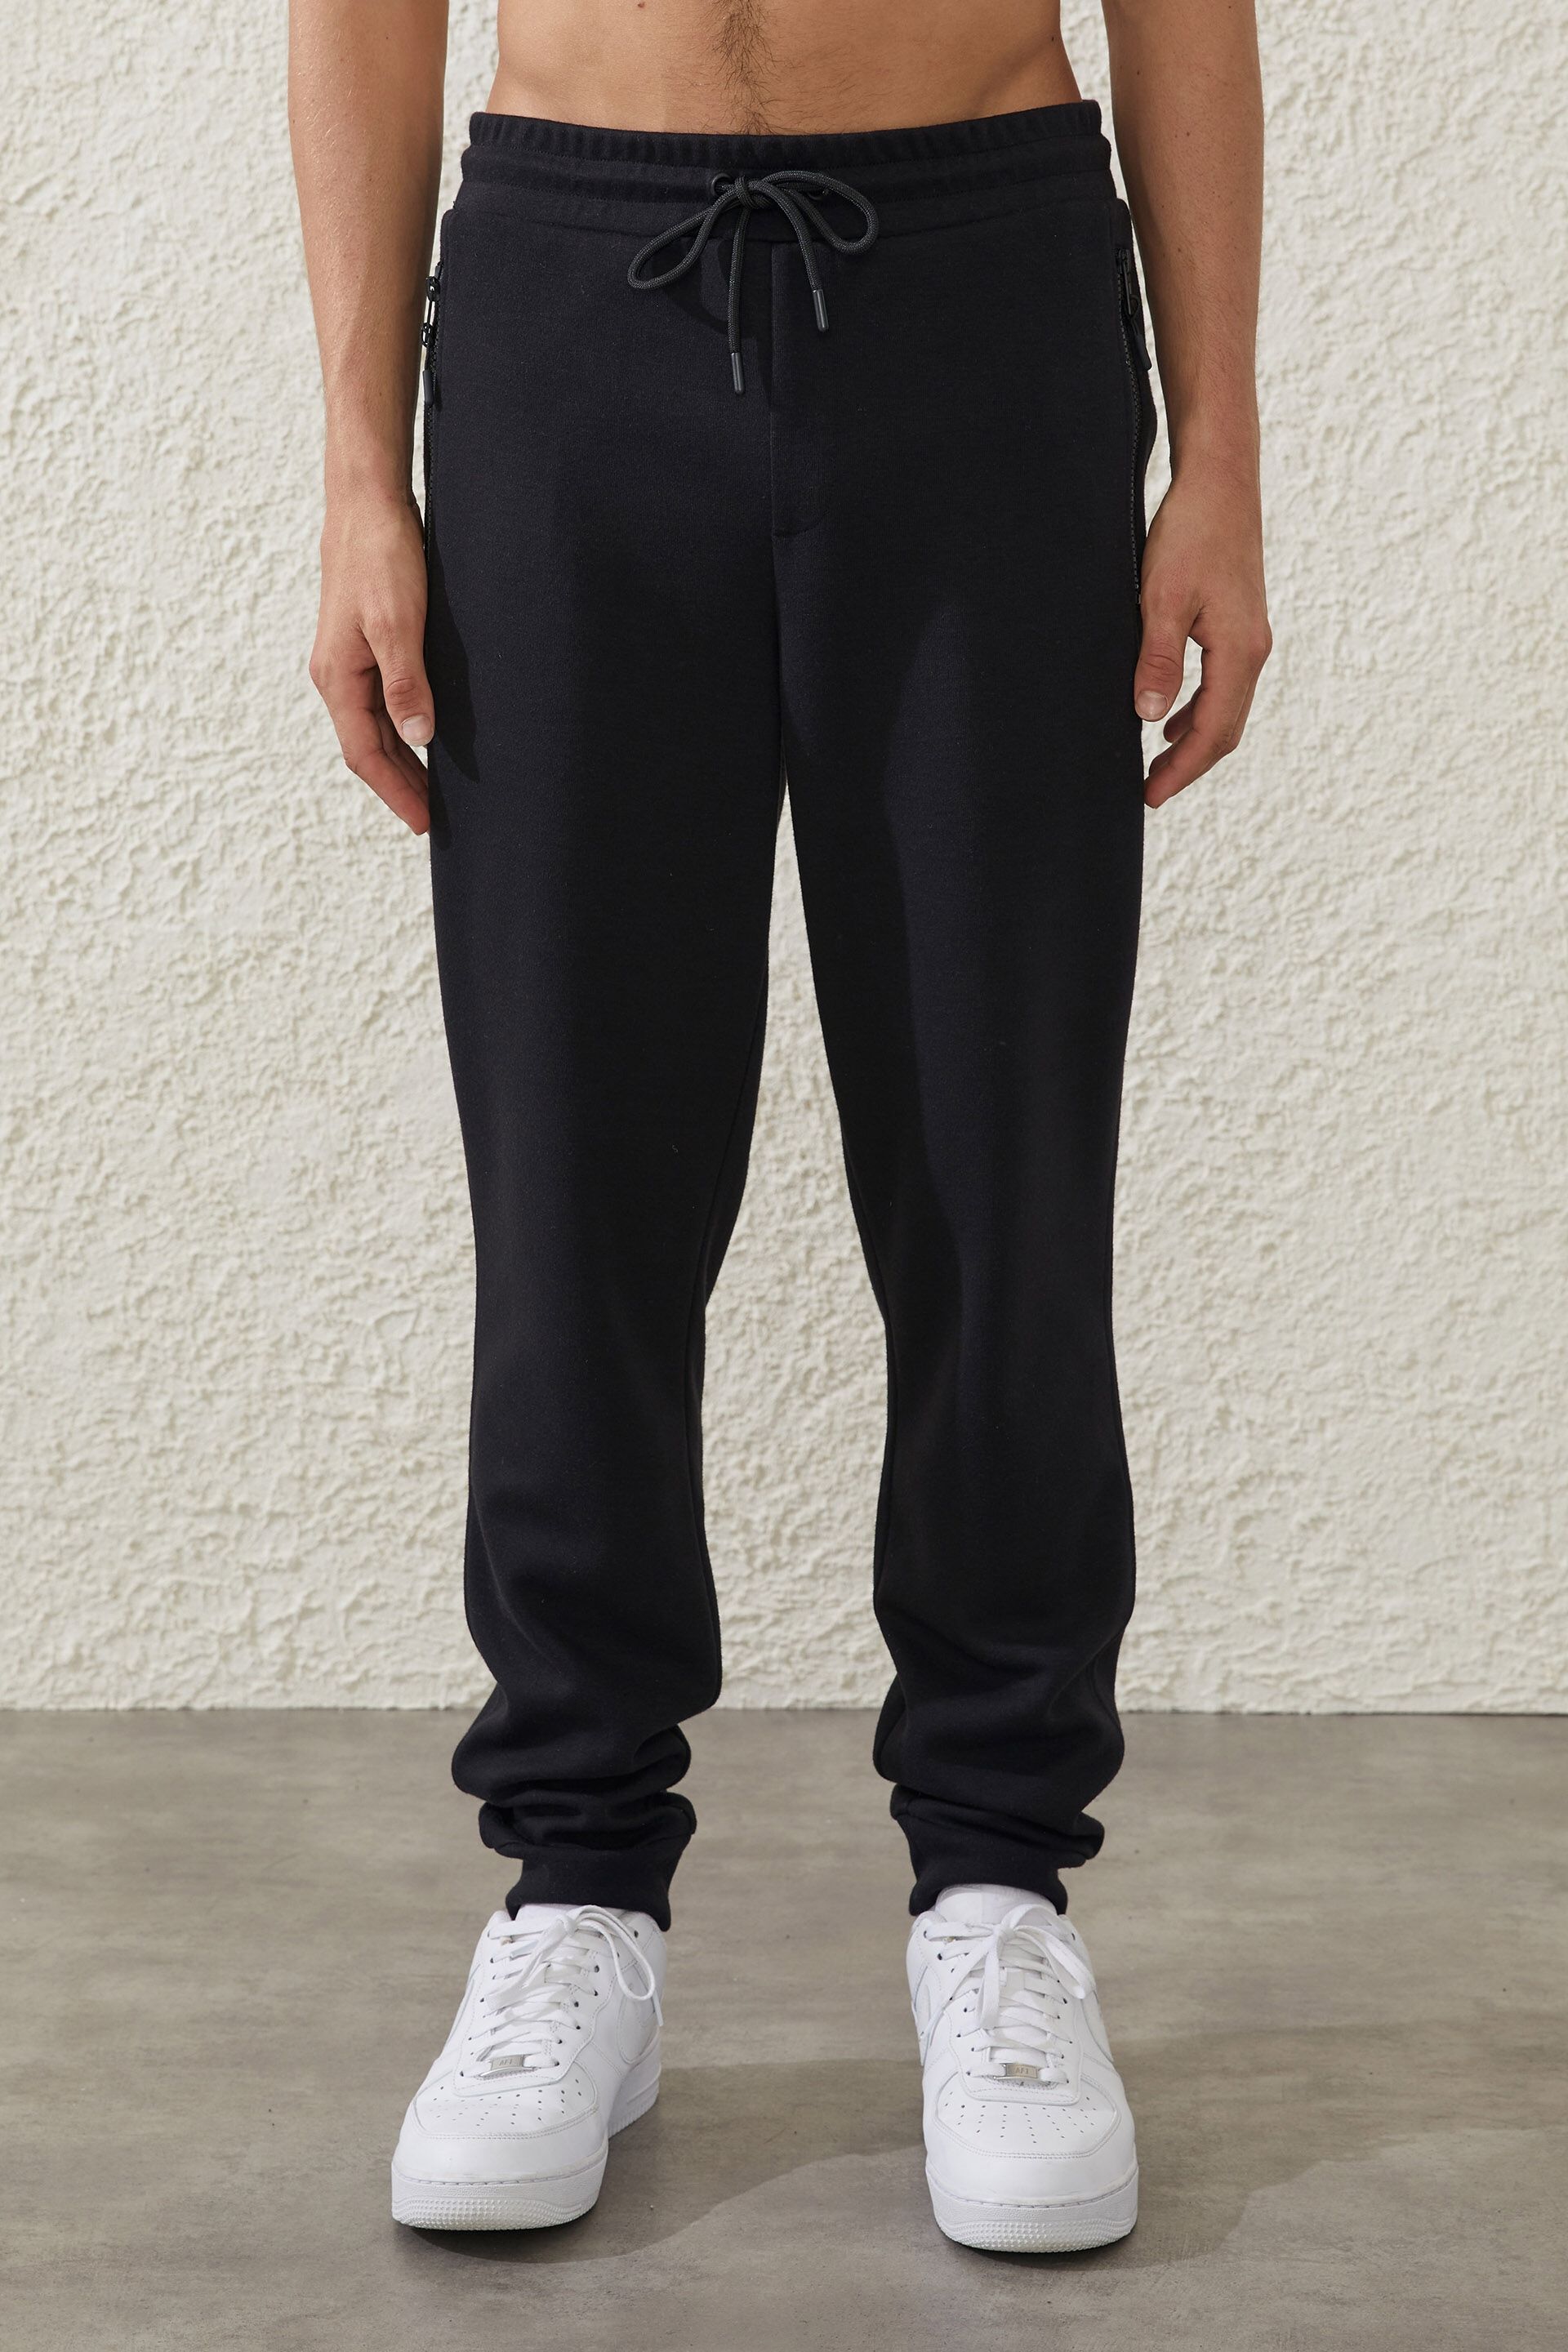 COTTON-DECODE Teen Boys Casual Jogger Track pants | Active playwear |  Fashionable look - Navy